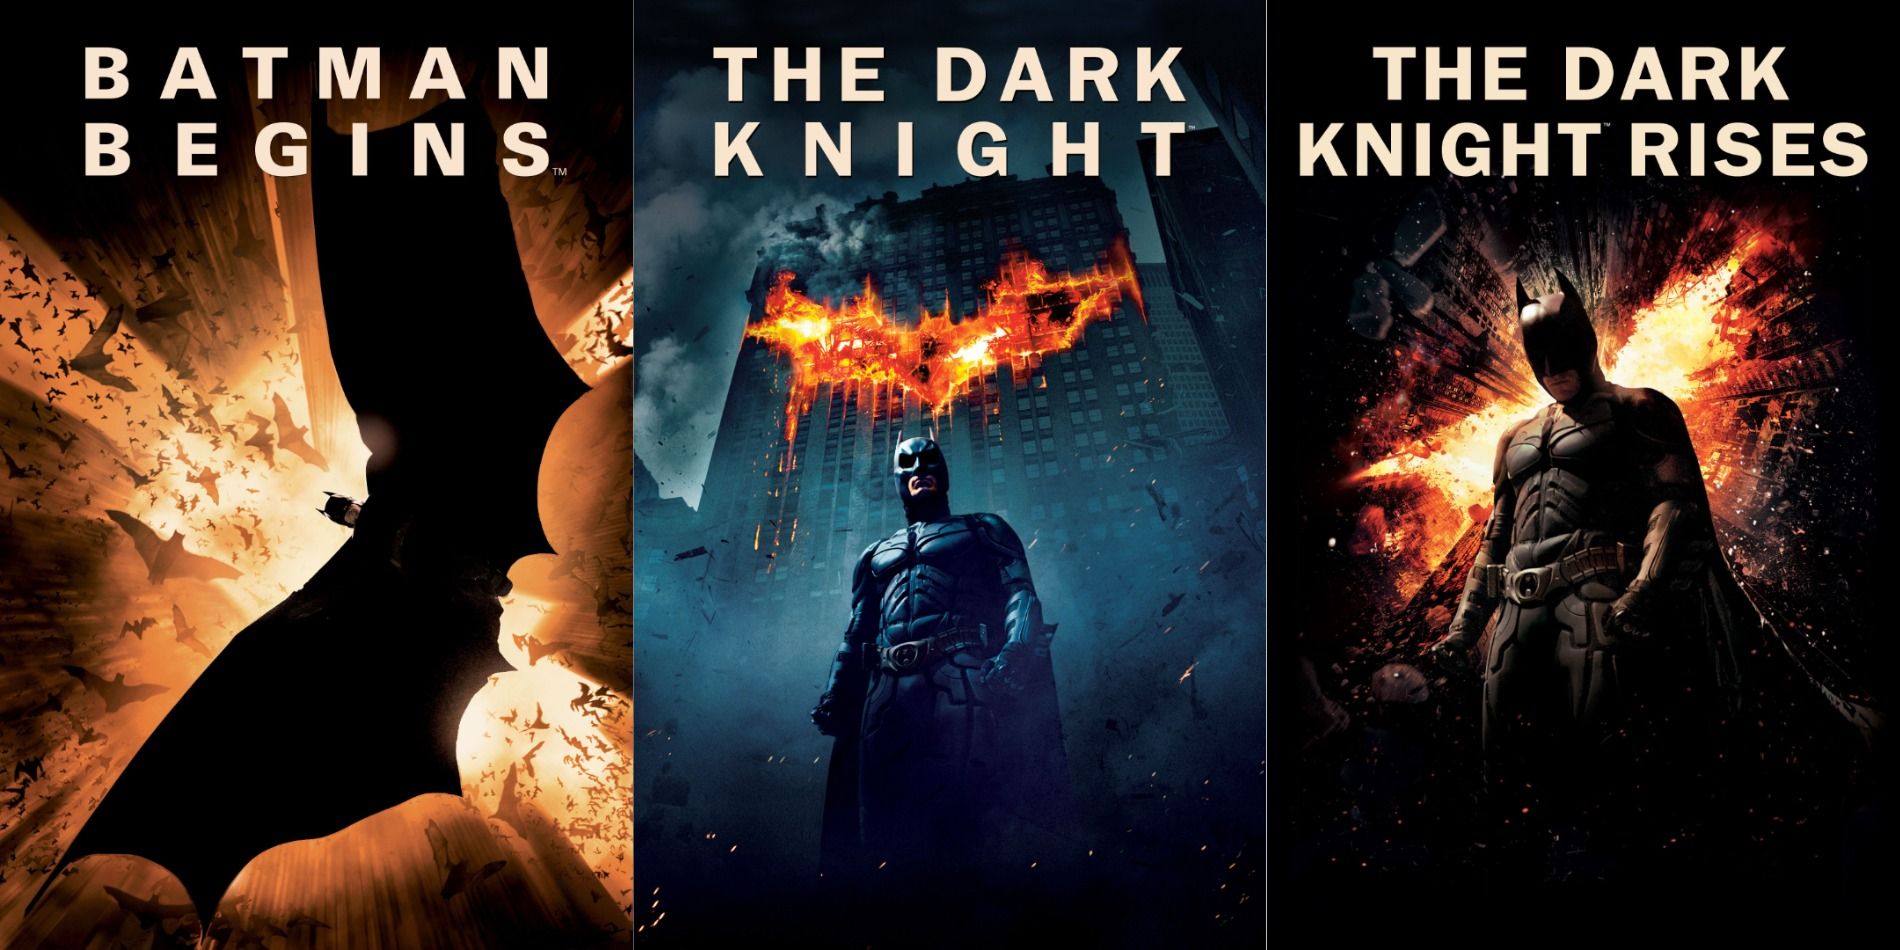 Posters for Batman Begins, The Dark Knight and The Dark Knight Rises